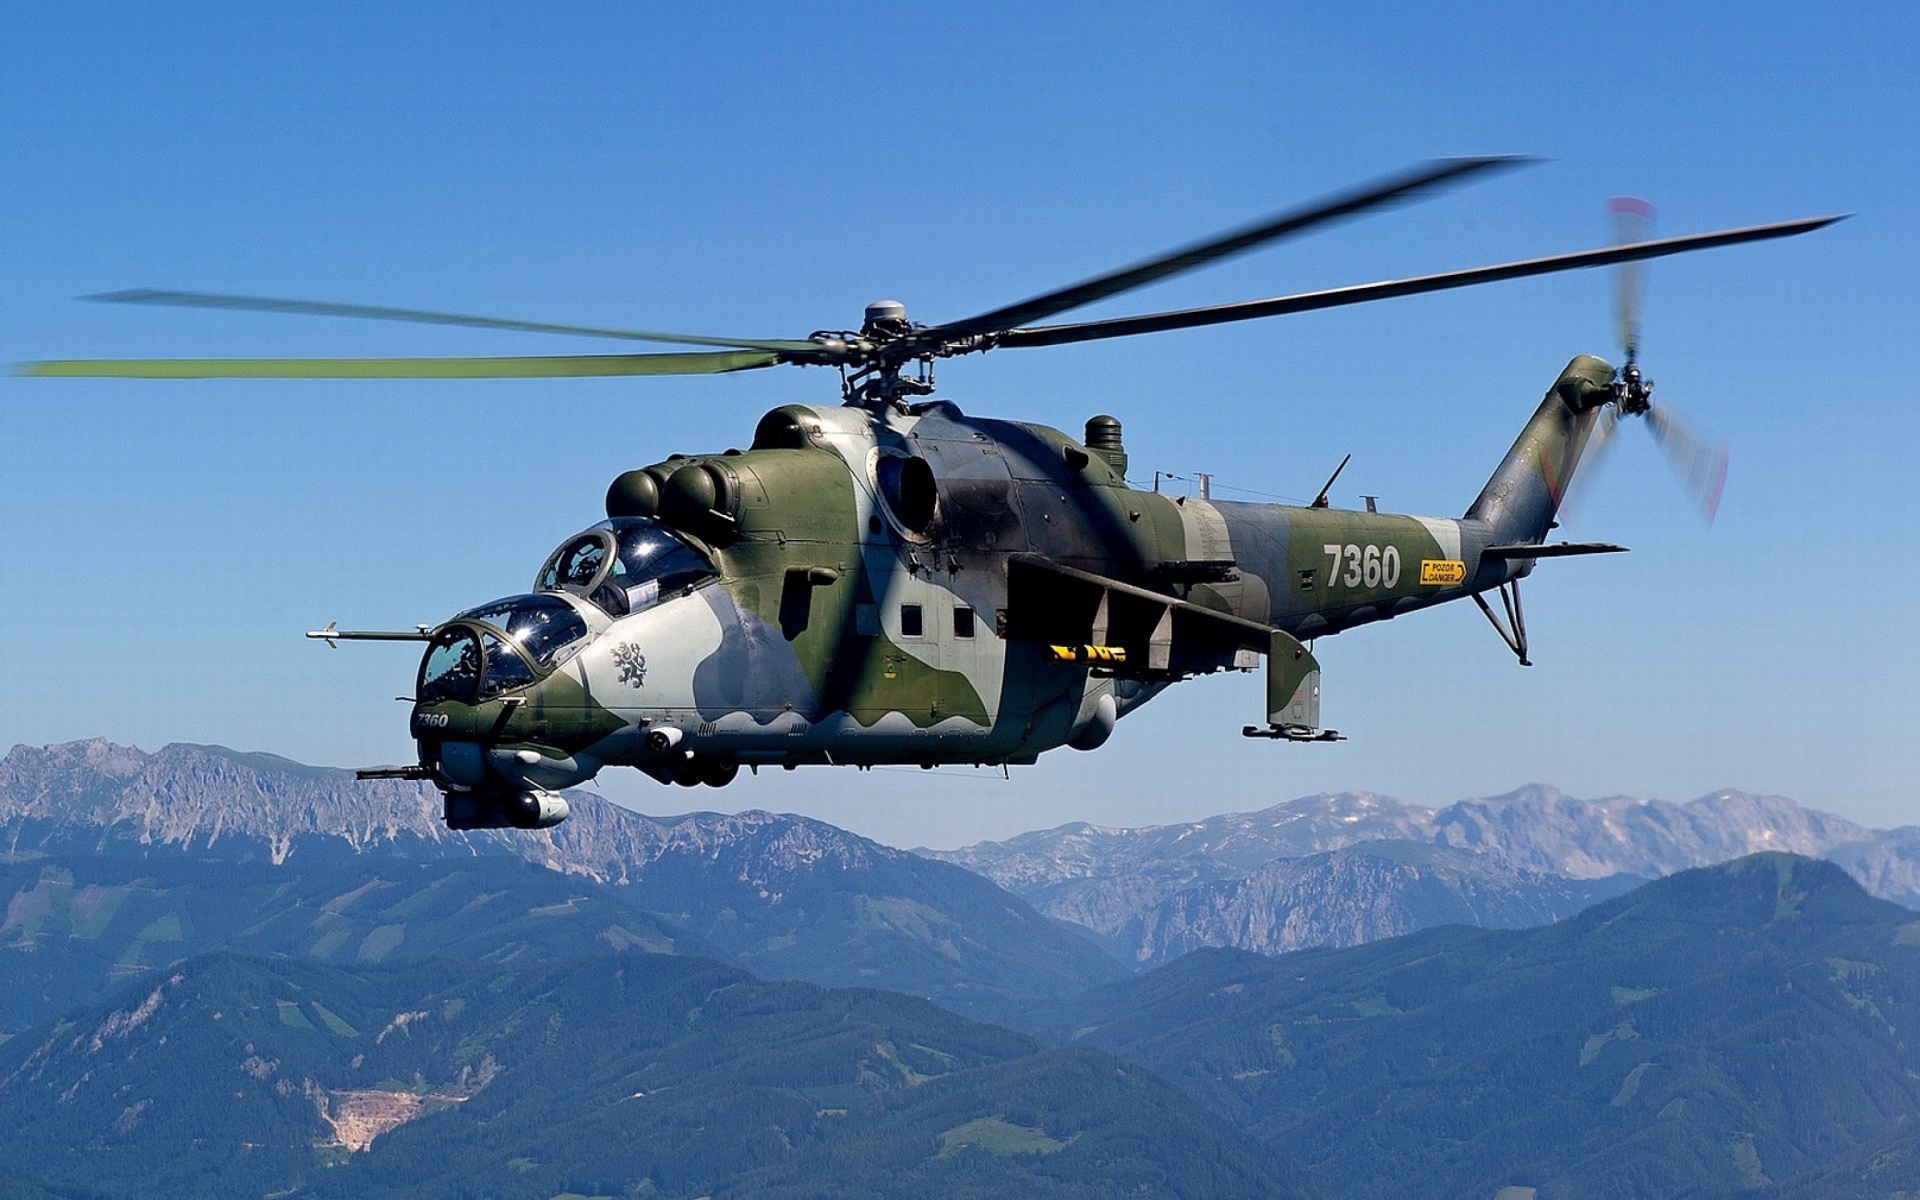 Mil Mi 24 Hind Attack Helicopter wallpaper 1920x1200